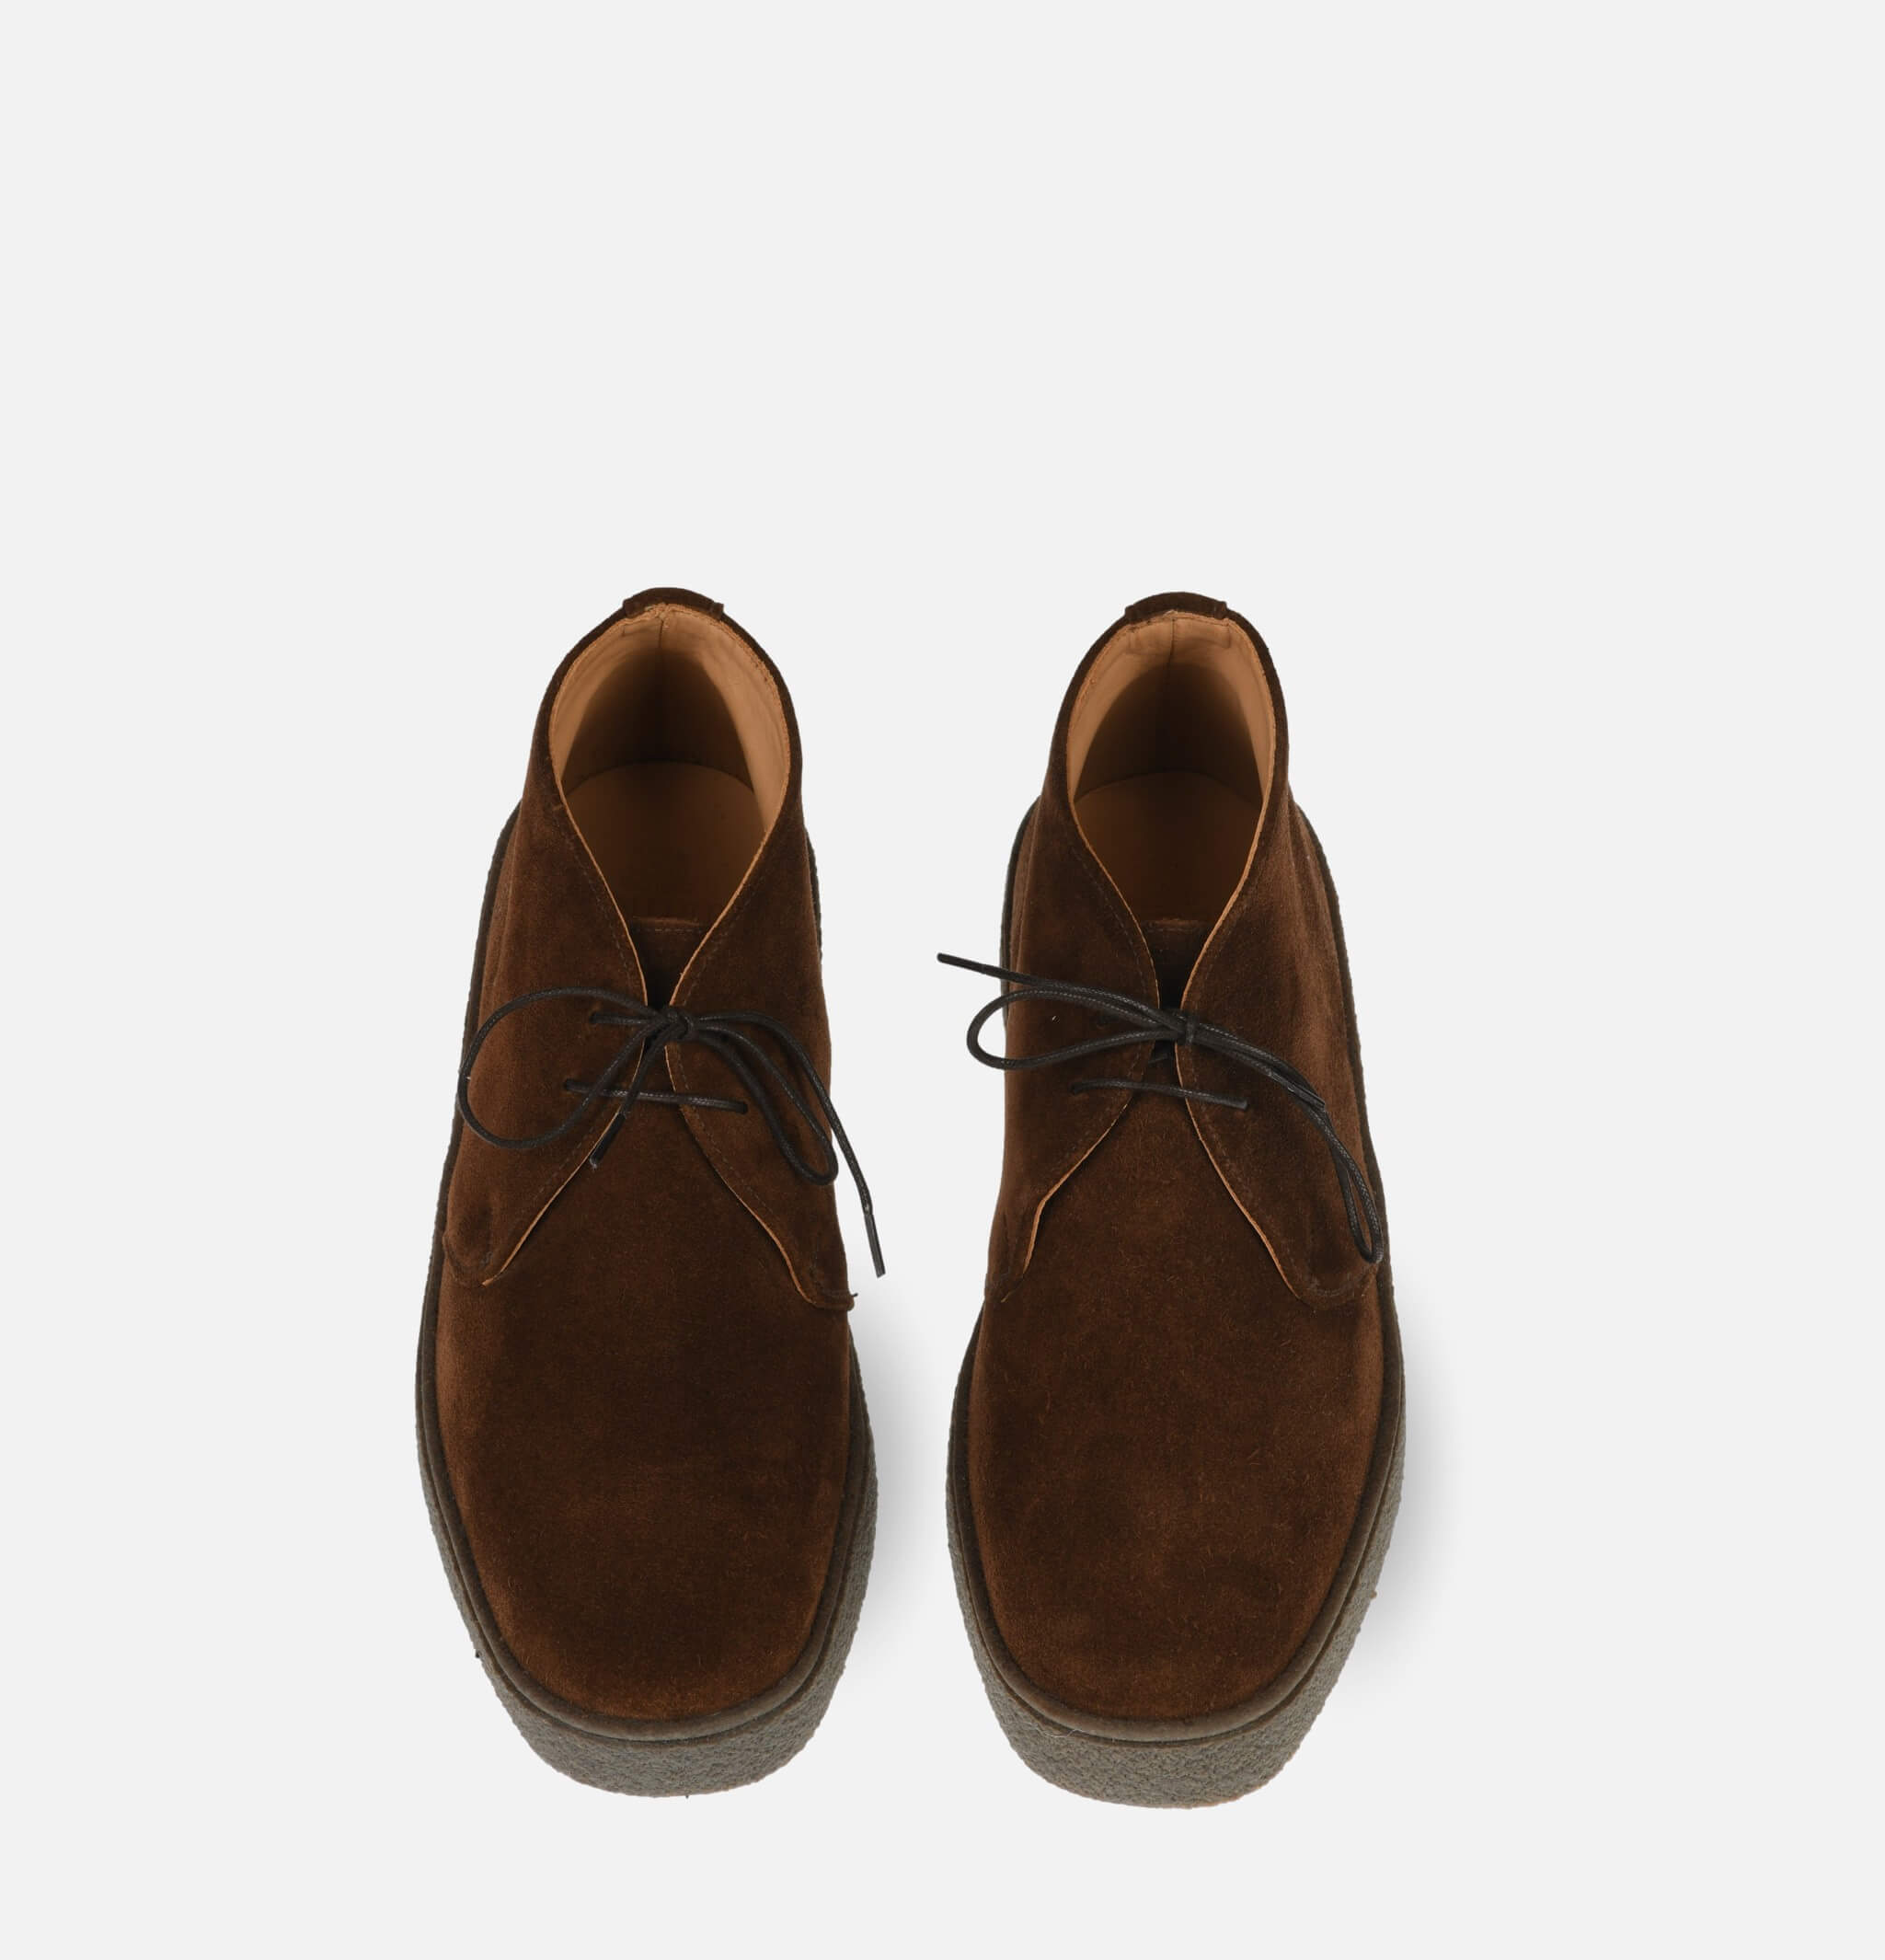 Luther Boots Snuff Suede